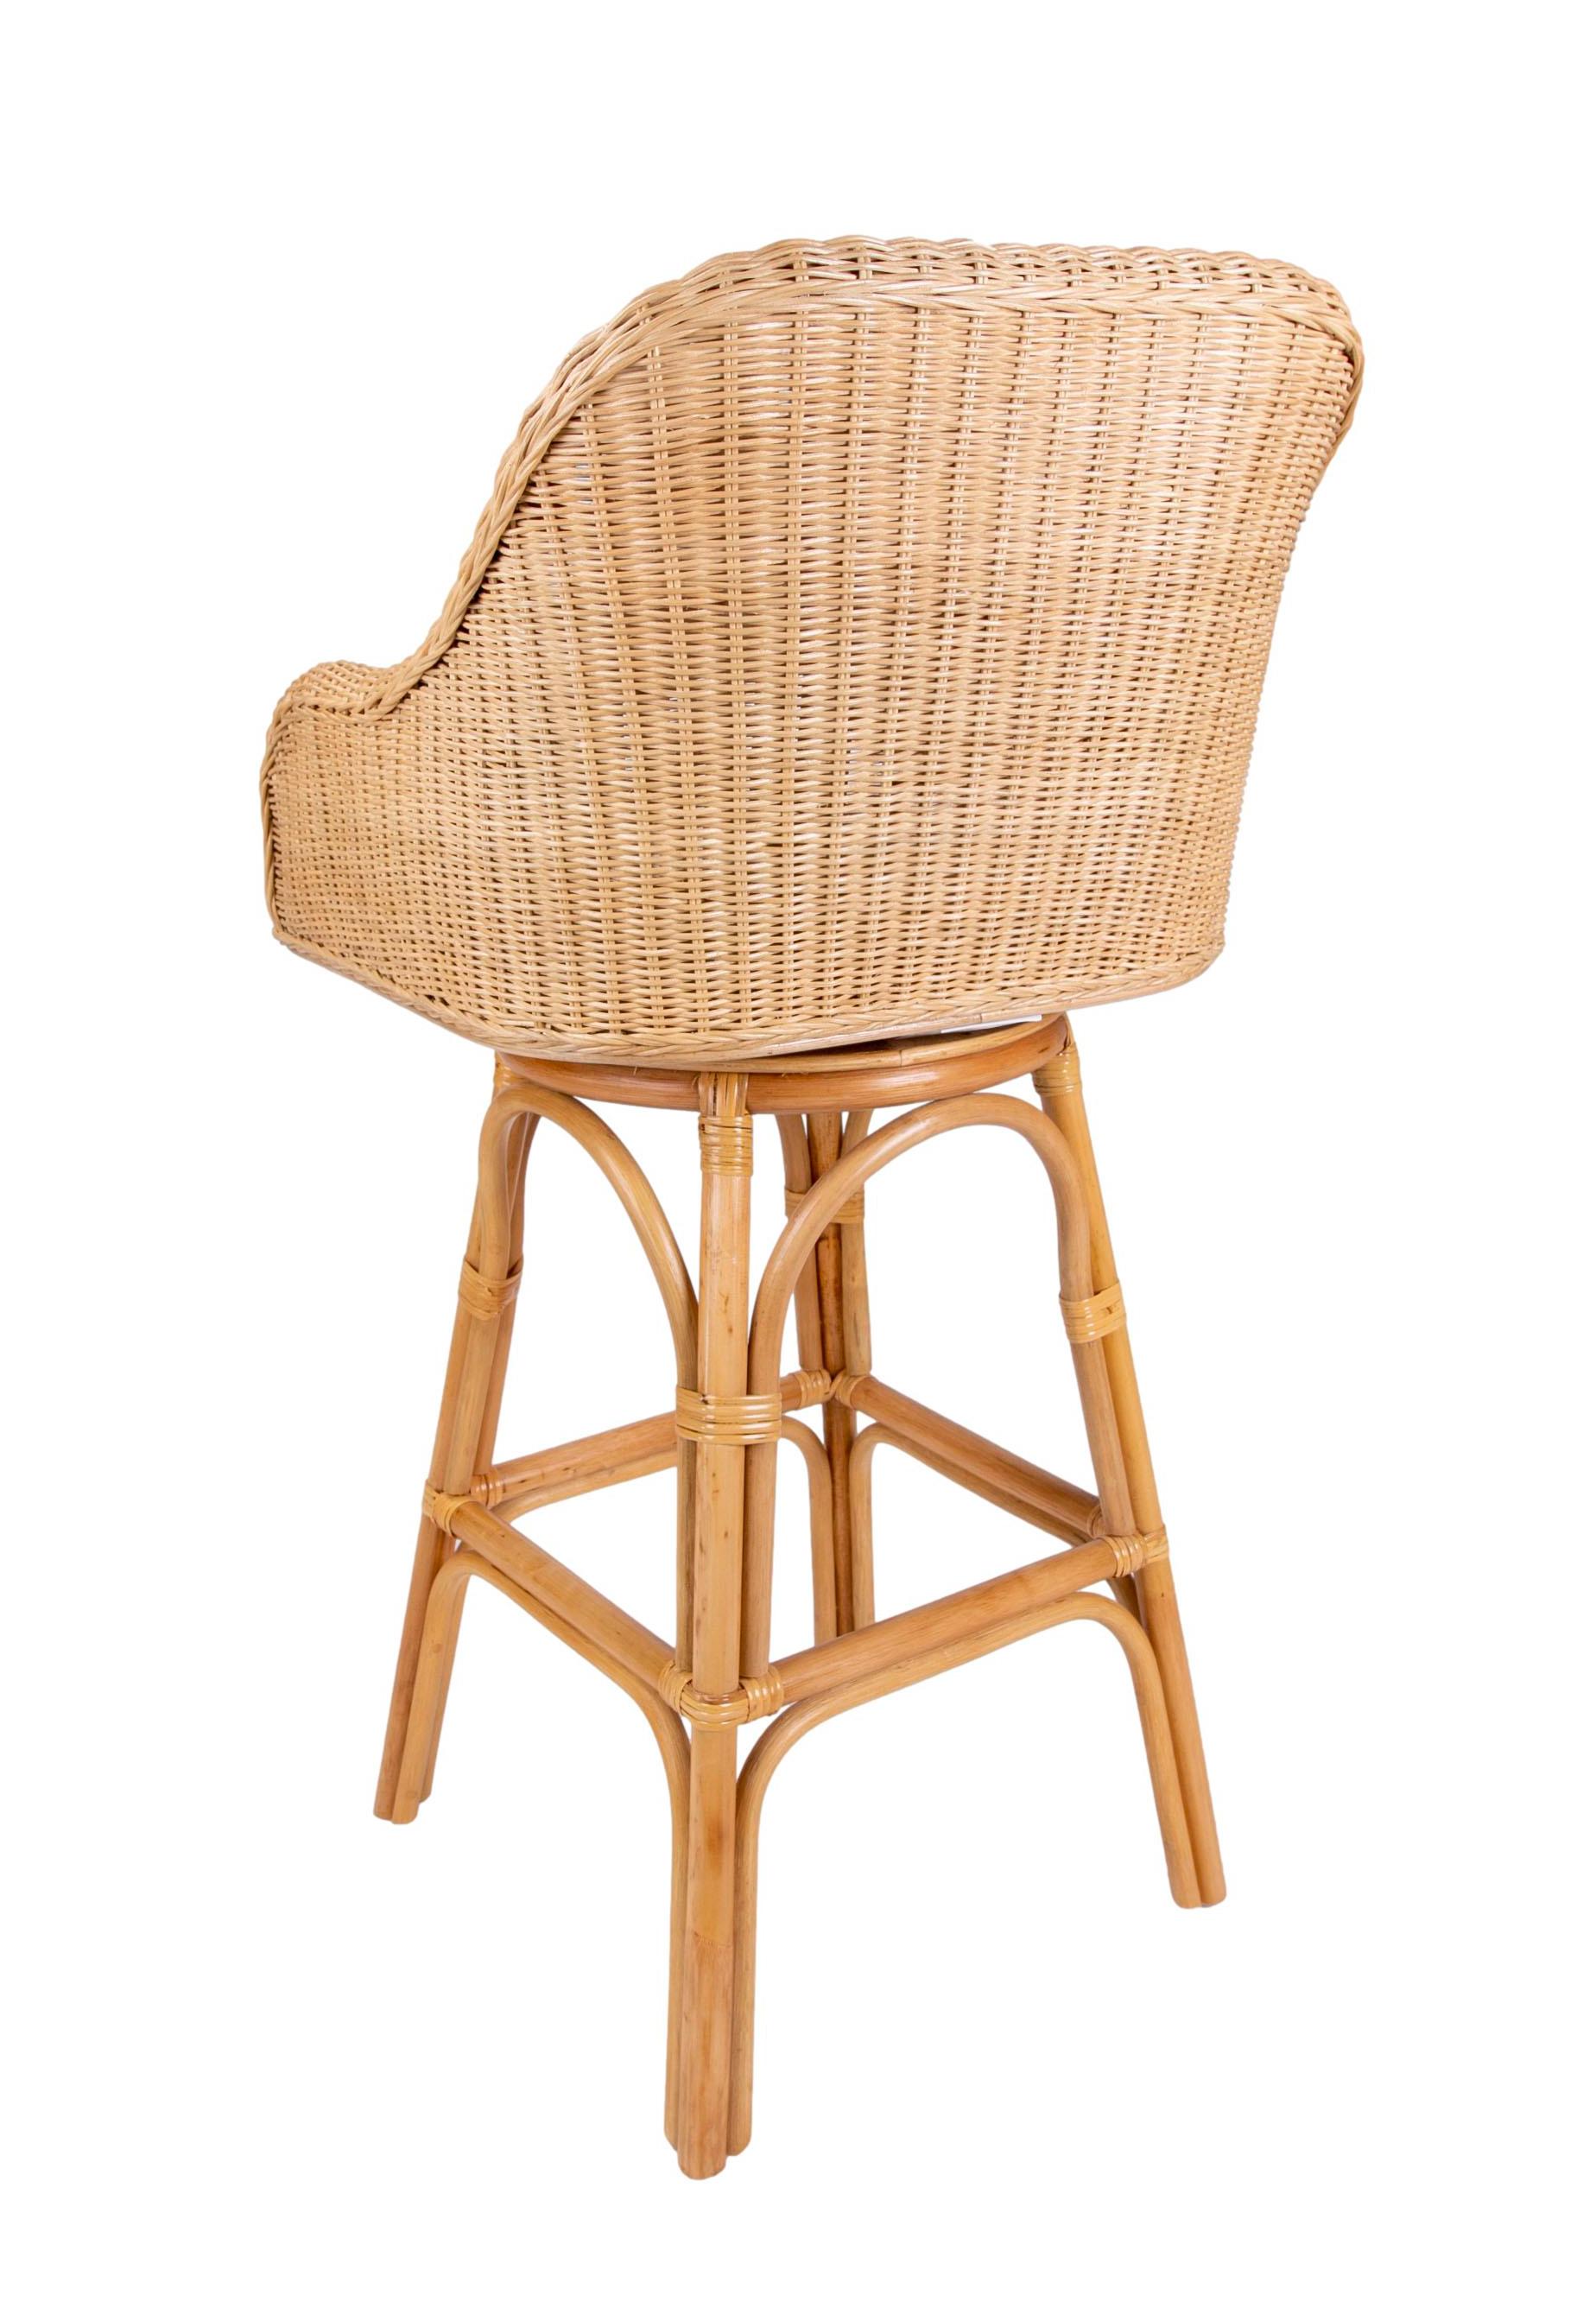 Set of Six Upholstered Rattan and Wicker Bar stools with Movement For Sale 1